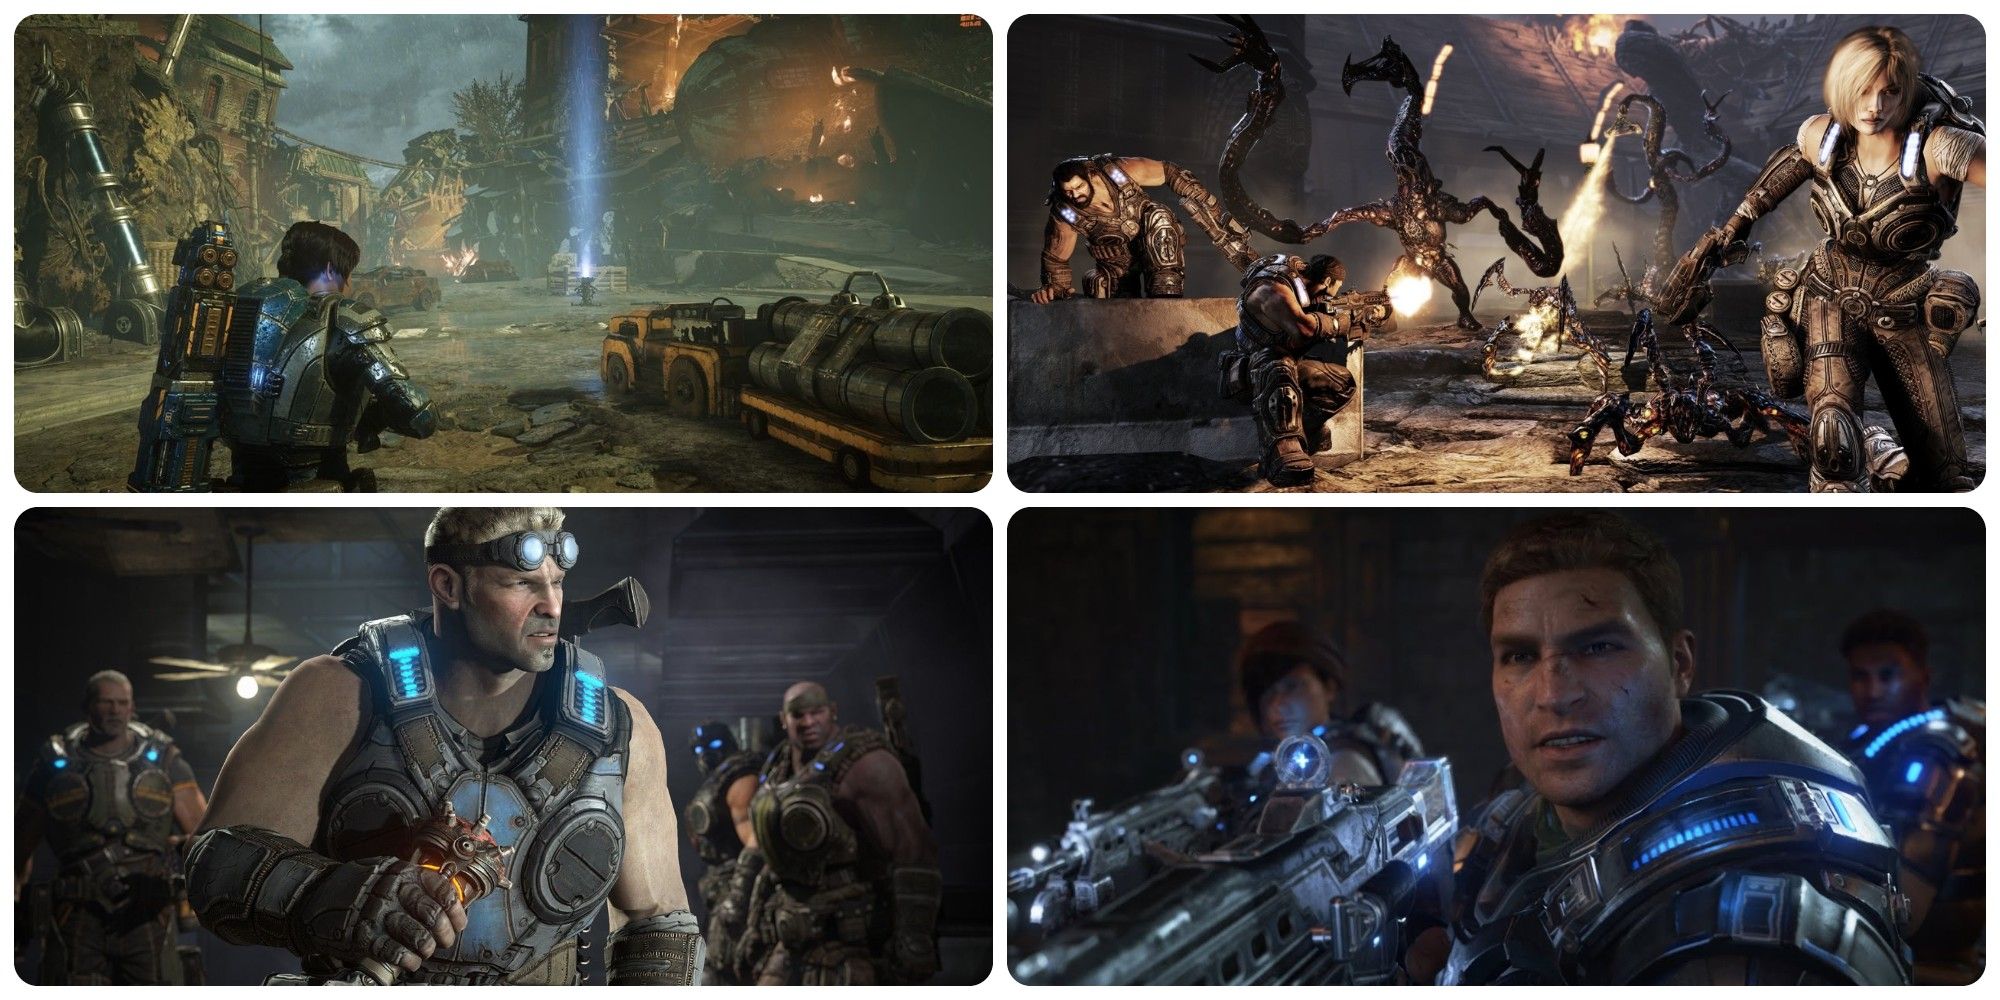 Ranking The Gears Of War Games From Worst To Best